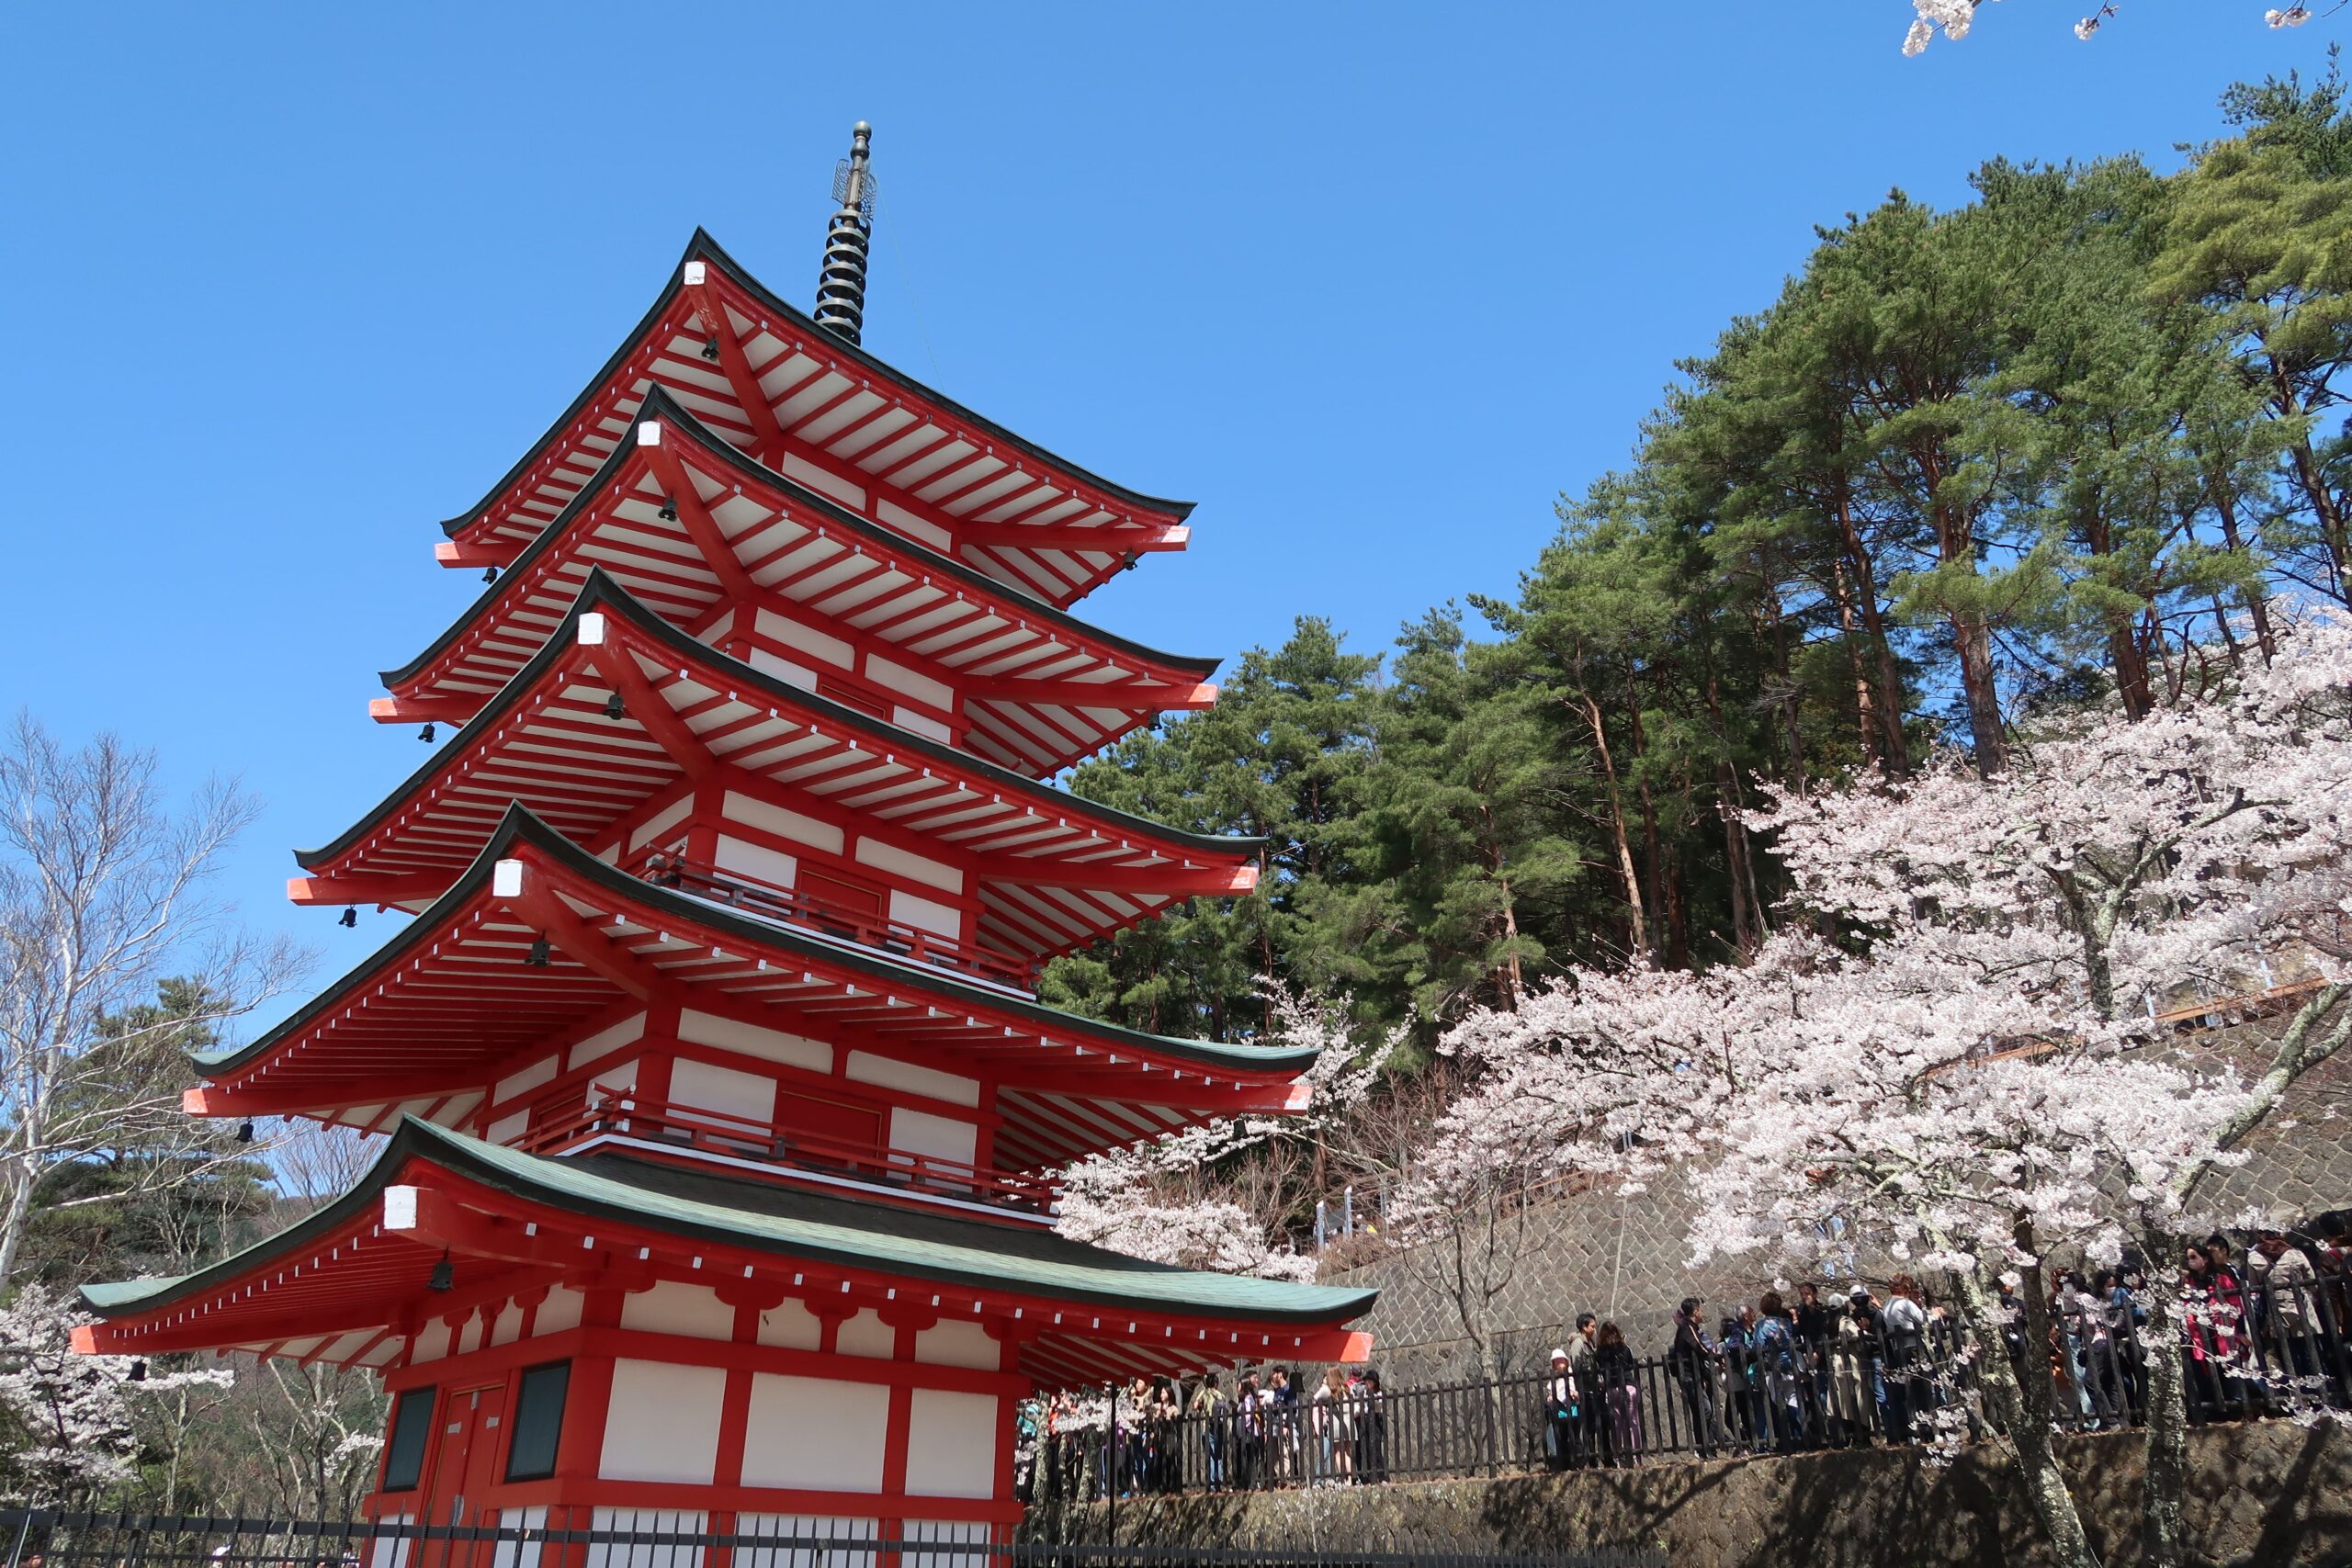 tokyo mount fuji chureito pagoda viewpoint cherry blossoms march april how to get there what to see and do